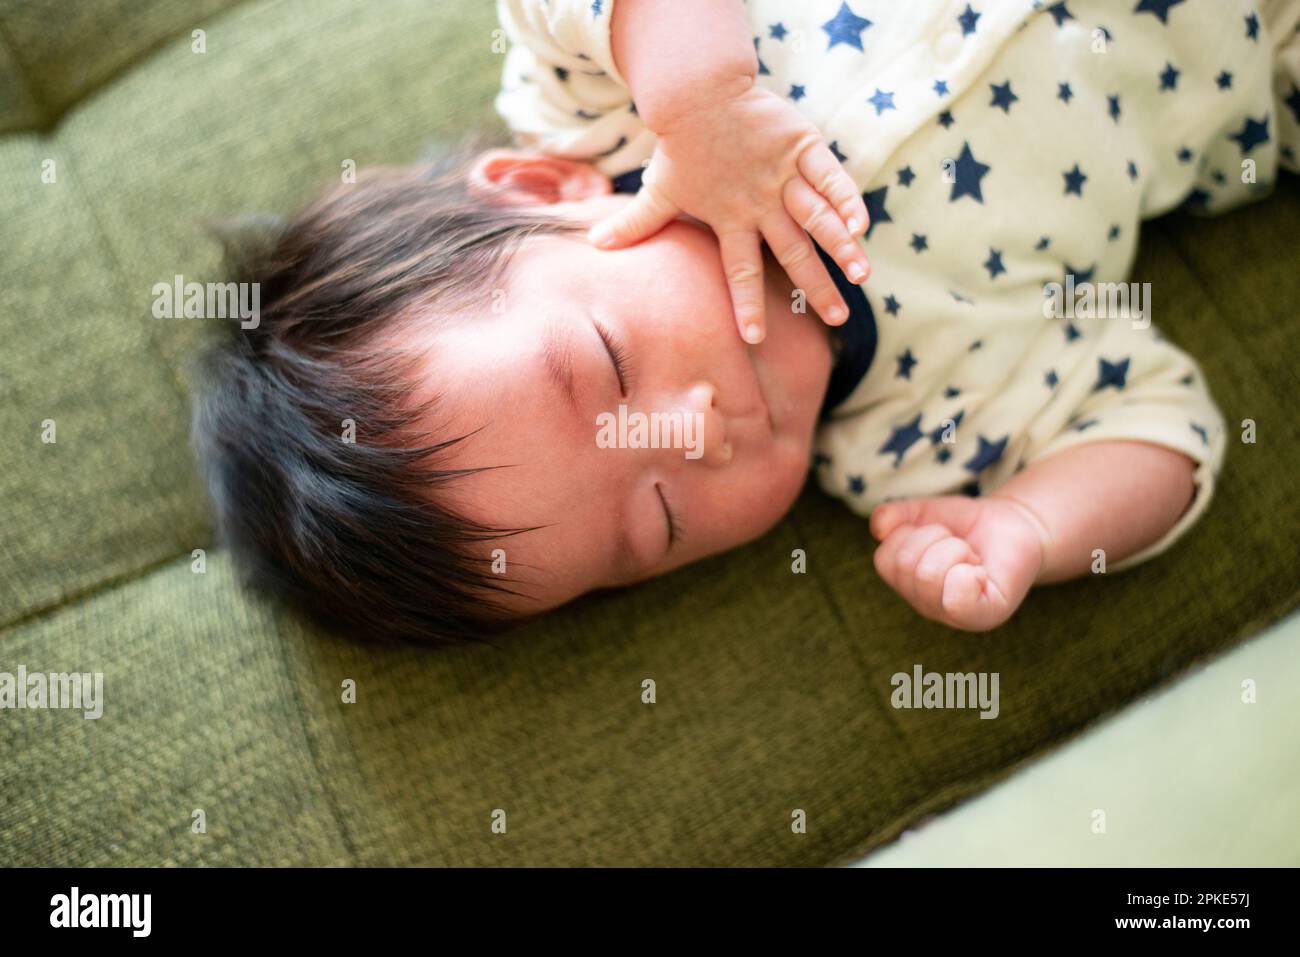 Baby sleeping on couch Stock Photo